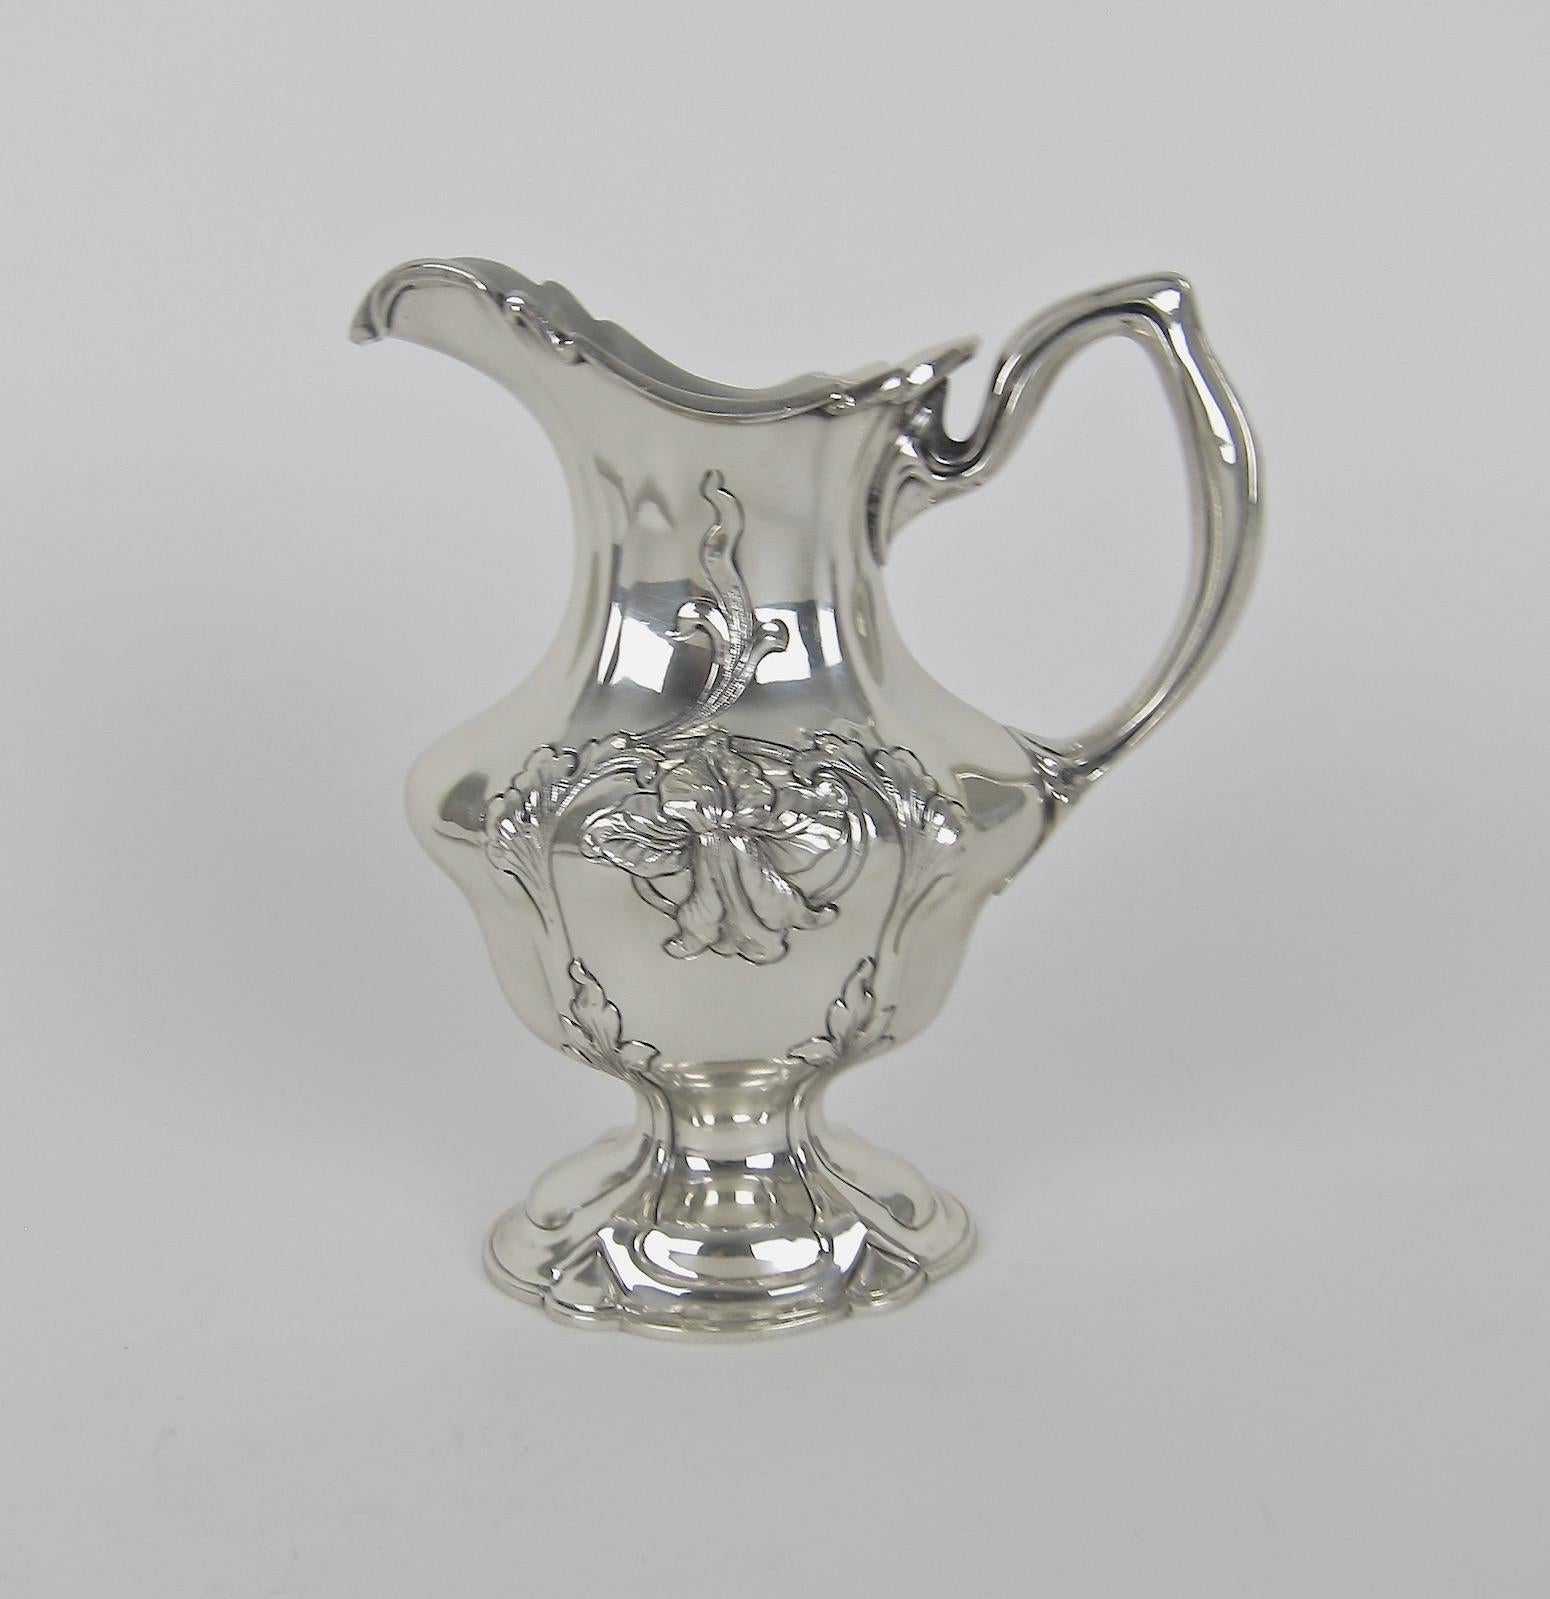 An American antique sterling silver creamer in the Art Nouveau style from Gorham Manufacturing Company of Providence, Rhode Island. The elegant Art Nouveau milk or cream pitcher rests on a spreading lobed foot and the body is decorated with delicate